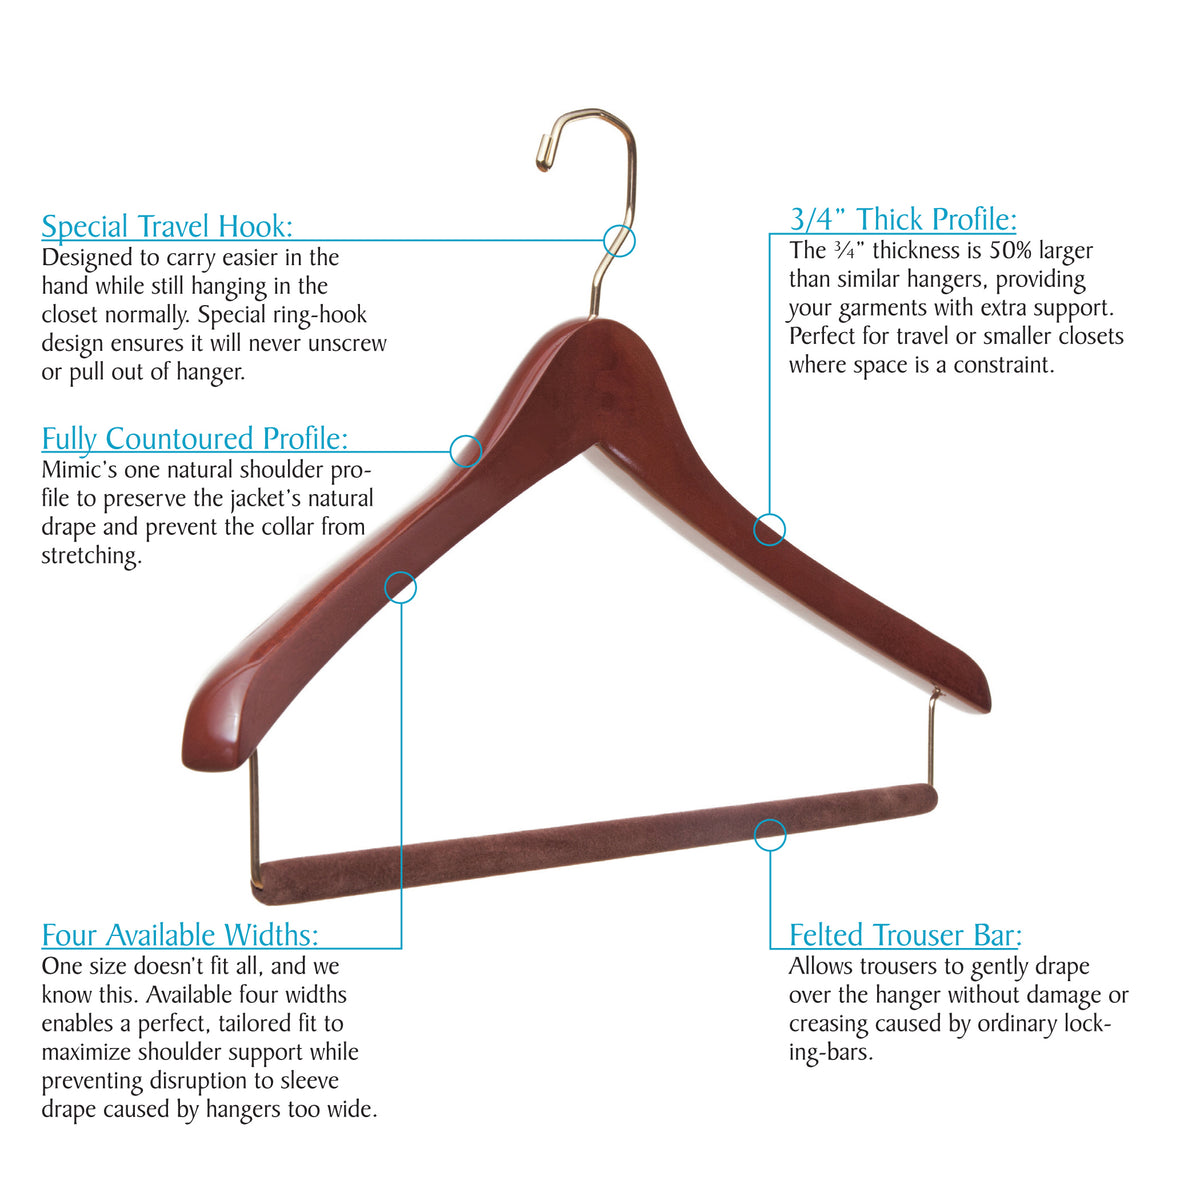 A Luxury Wooden Travel Hanger from KirbyAllison.com, ideal for small closets or travel.